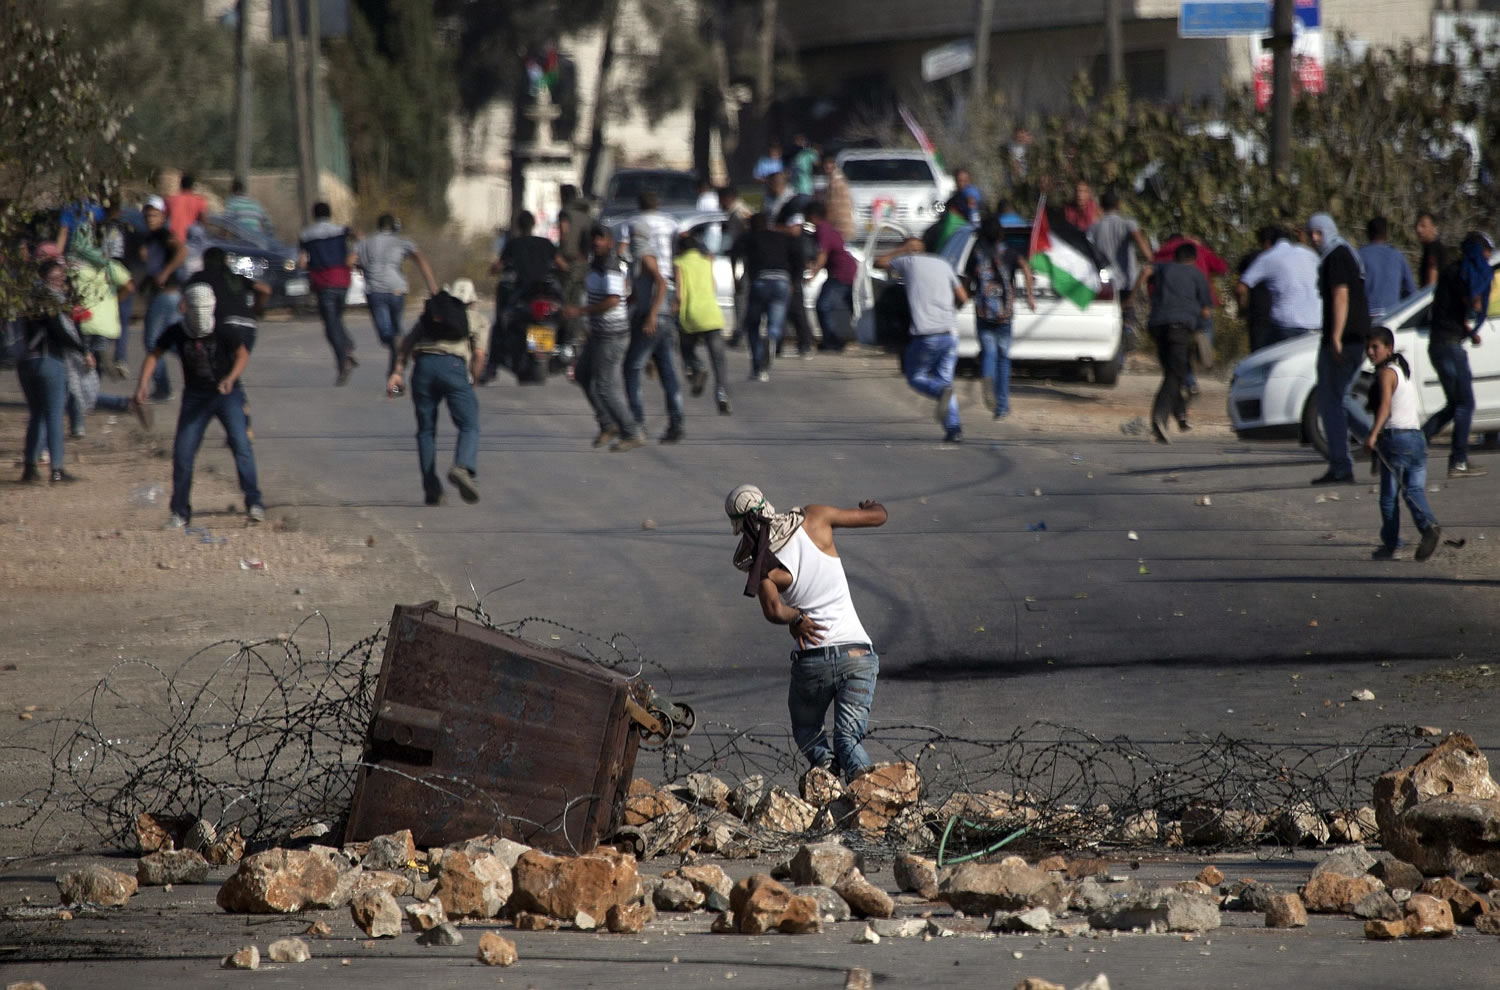 Palestinians run after a comrade is hit by a rubber coated metal bullet in the back during clashes with Israeli forces after the funeral for Palestinian-American, Orwah Hammad, 14, who was shot dead Friday.